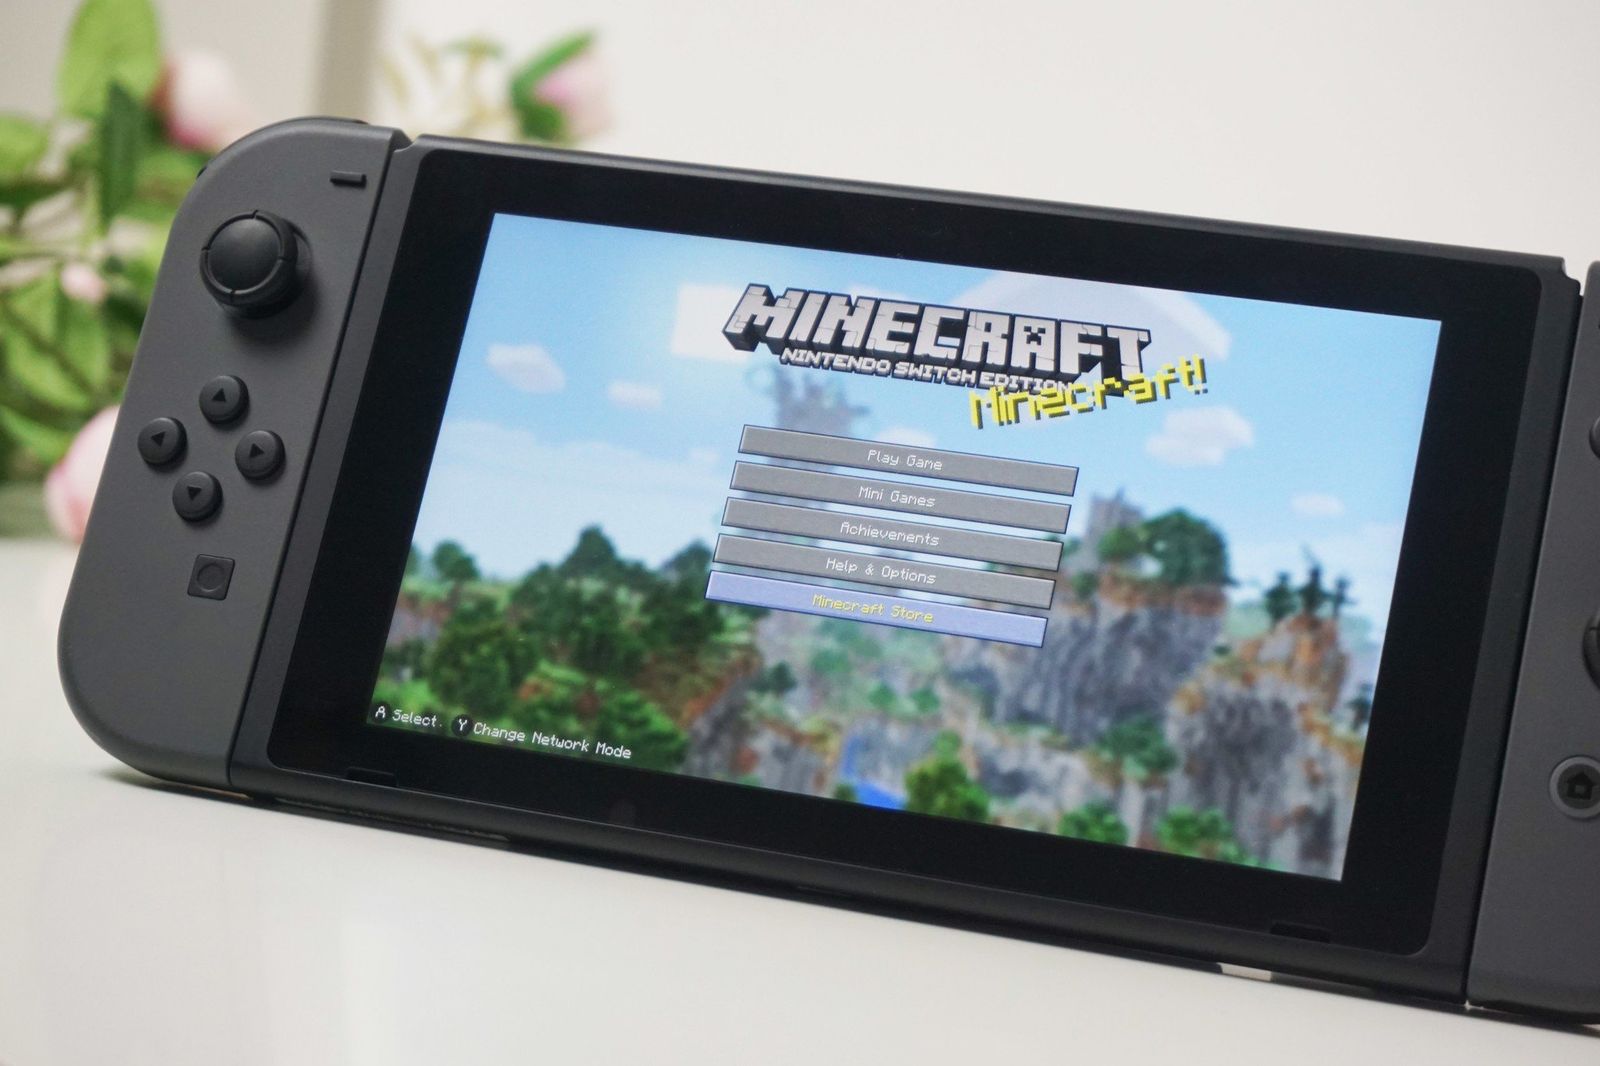 How To Use Minecraft Cross Play On Xbox One And Nintendo Switch Windows Central